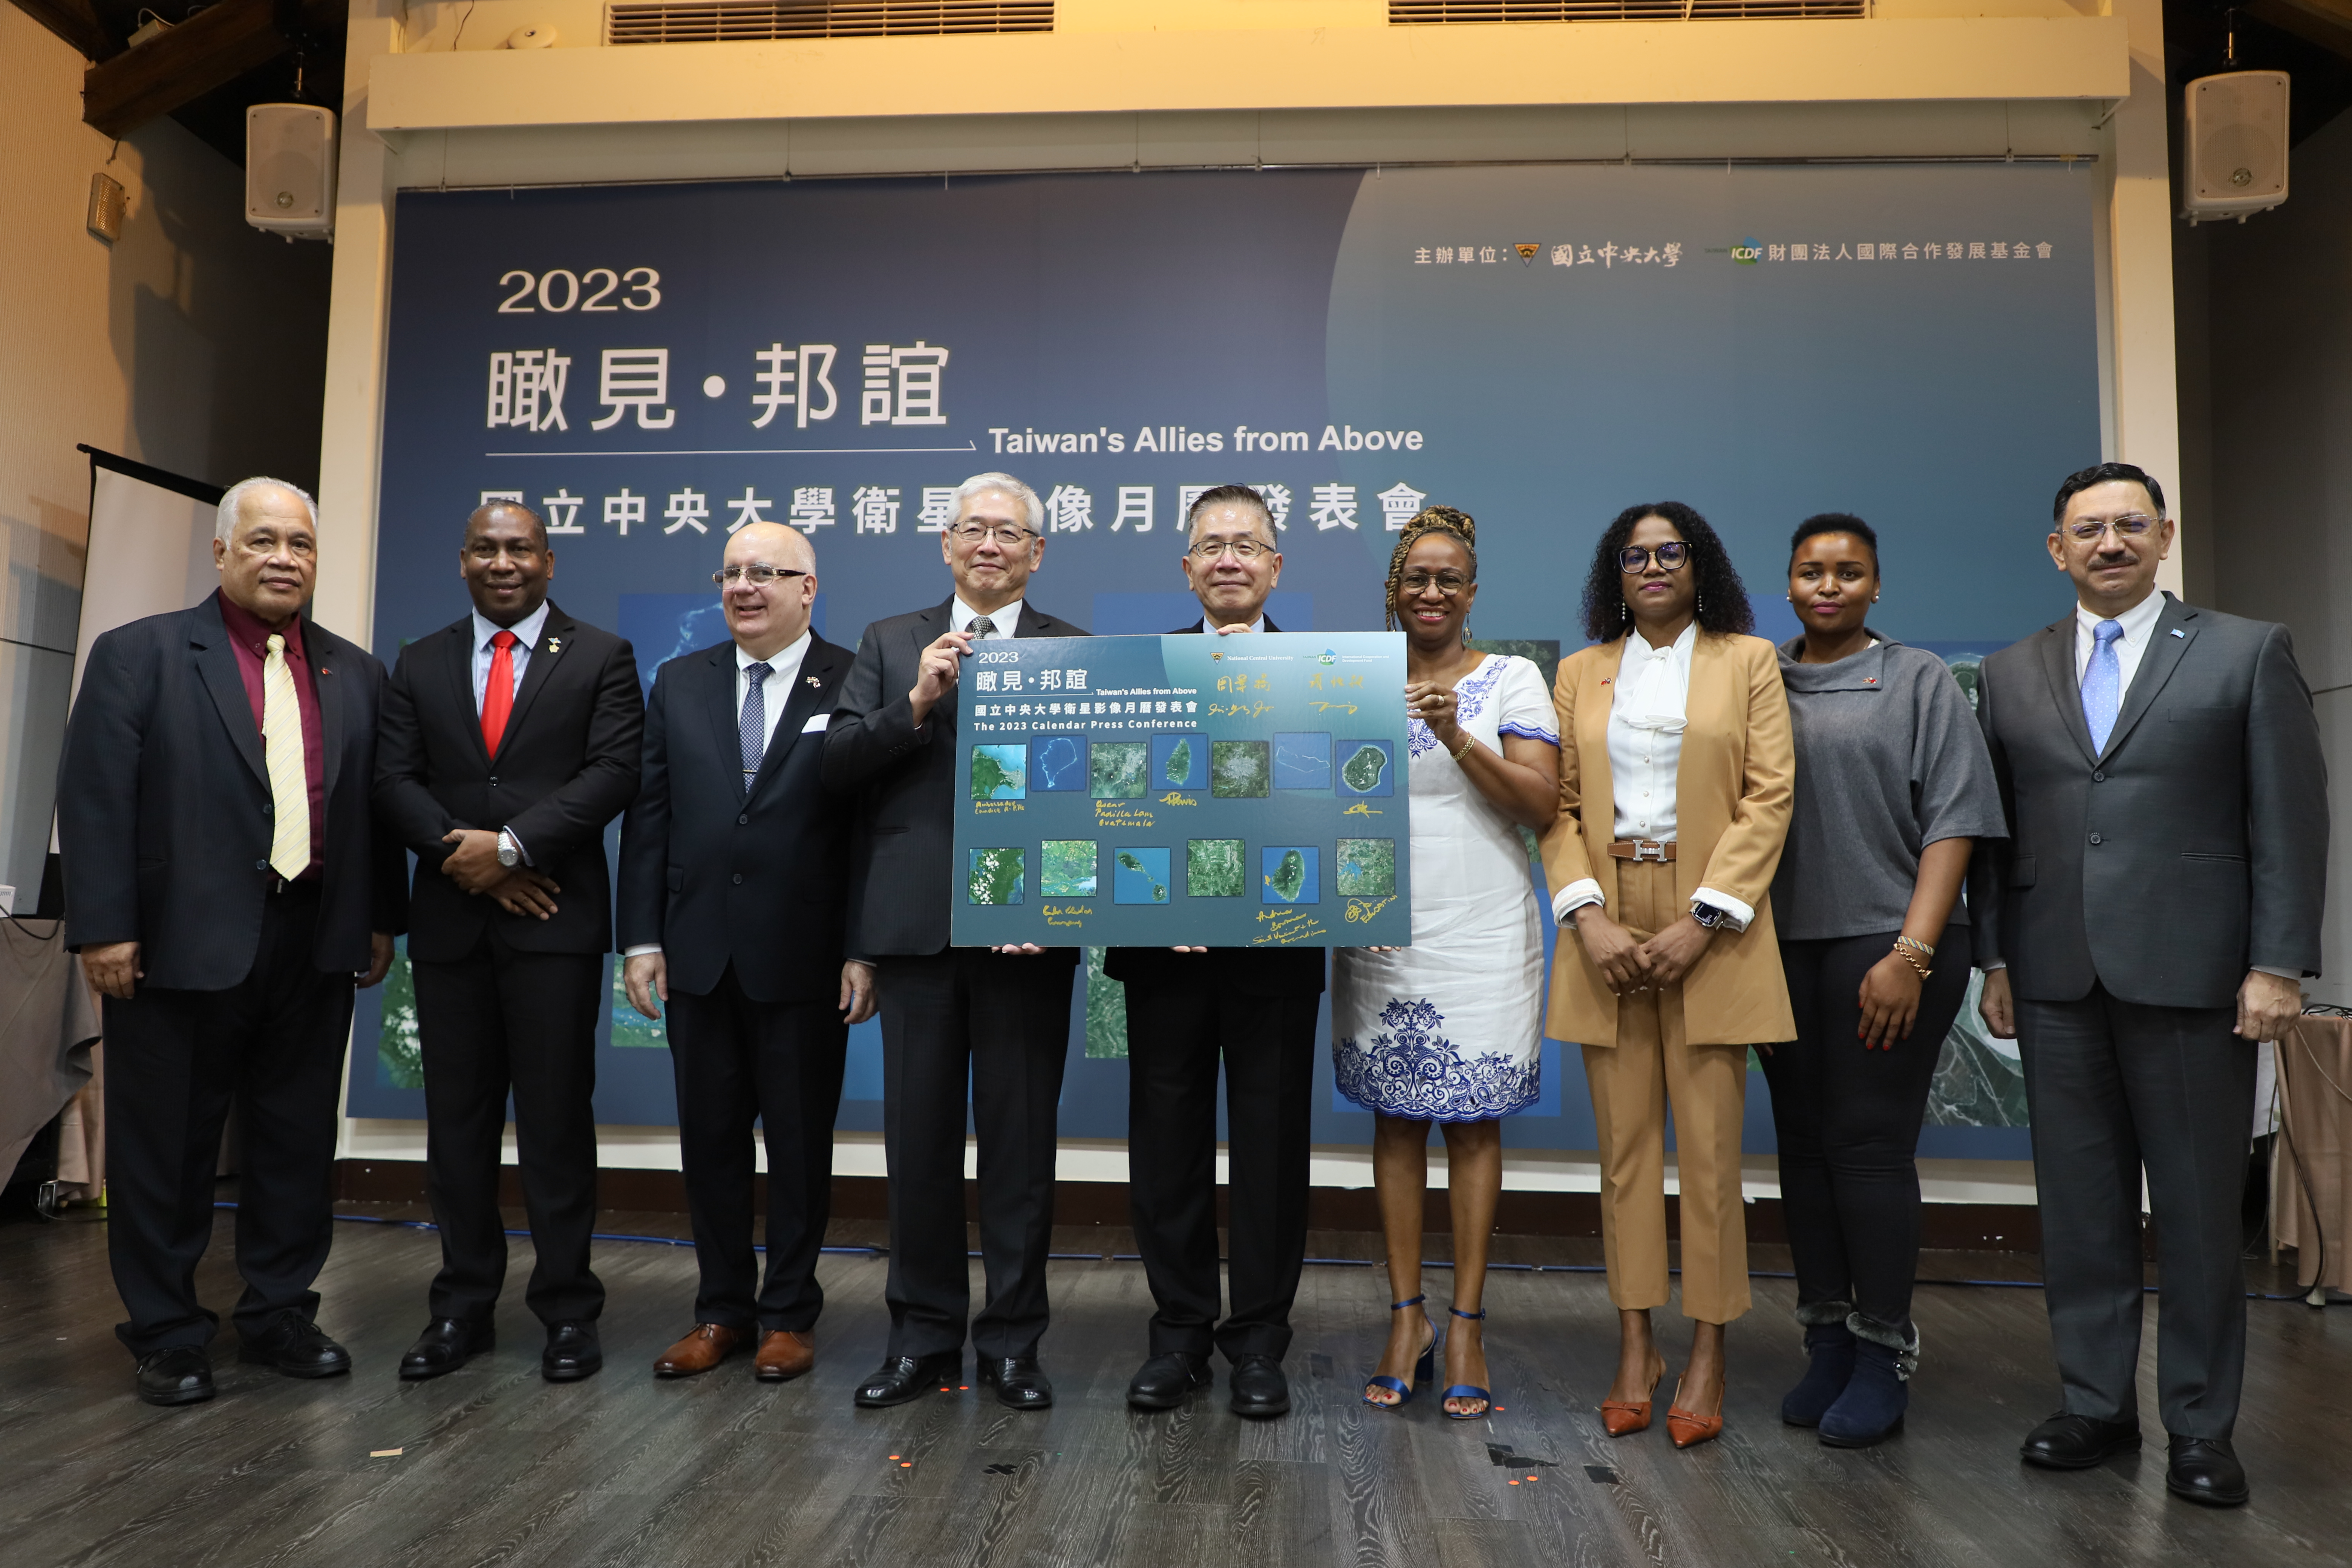 TaiwanICDF and NCU Choose “Foreign Assistance” as the Theme for the First Time To Co-Produce the 2023 “Taiwan’s Allies from Above” Calendar of Satellite Image